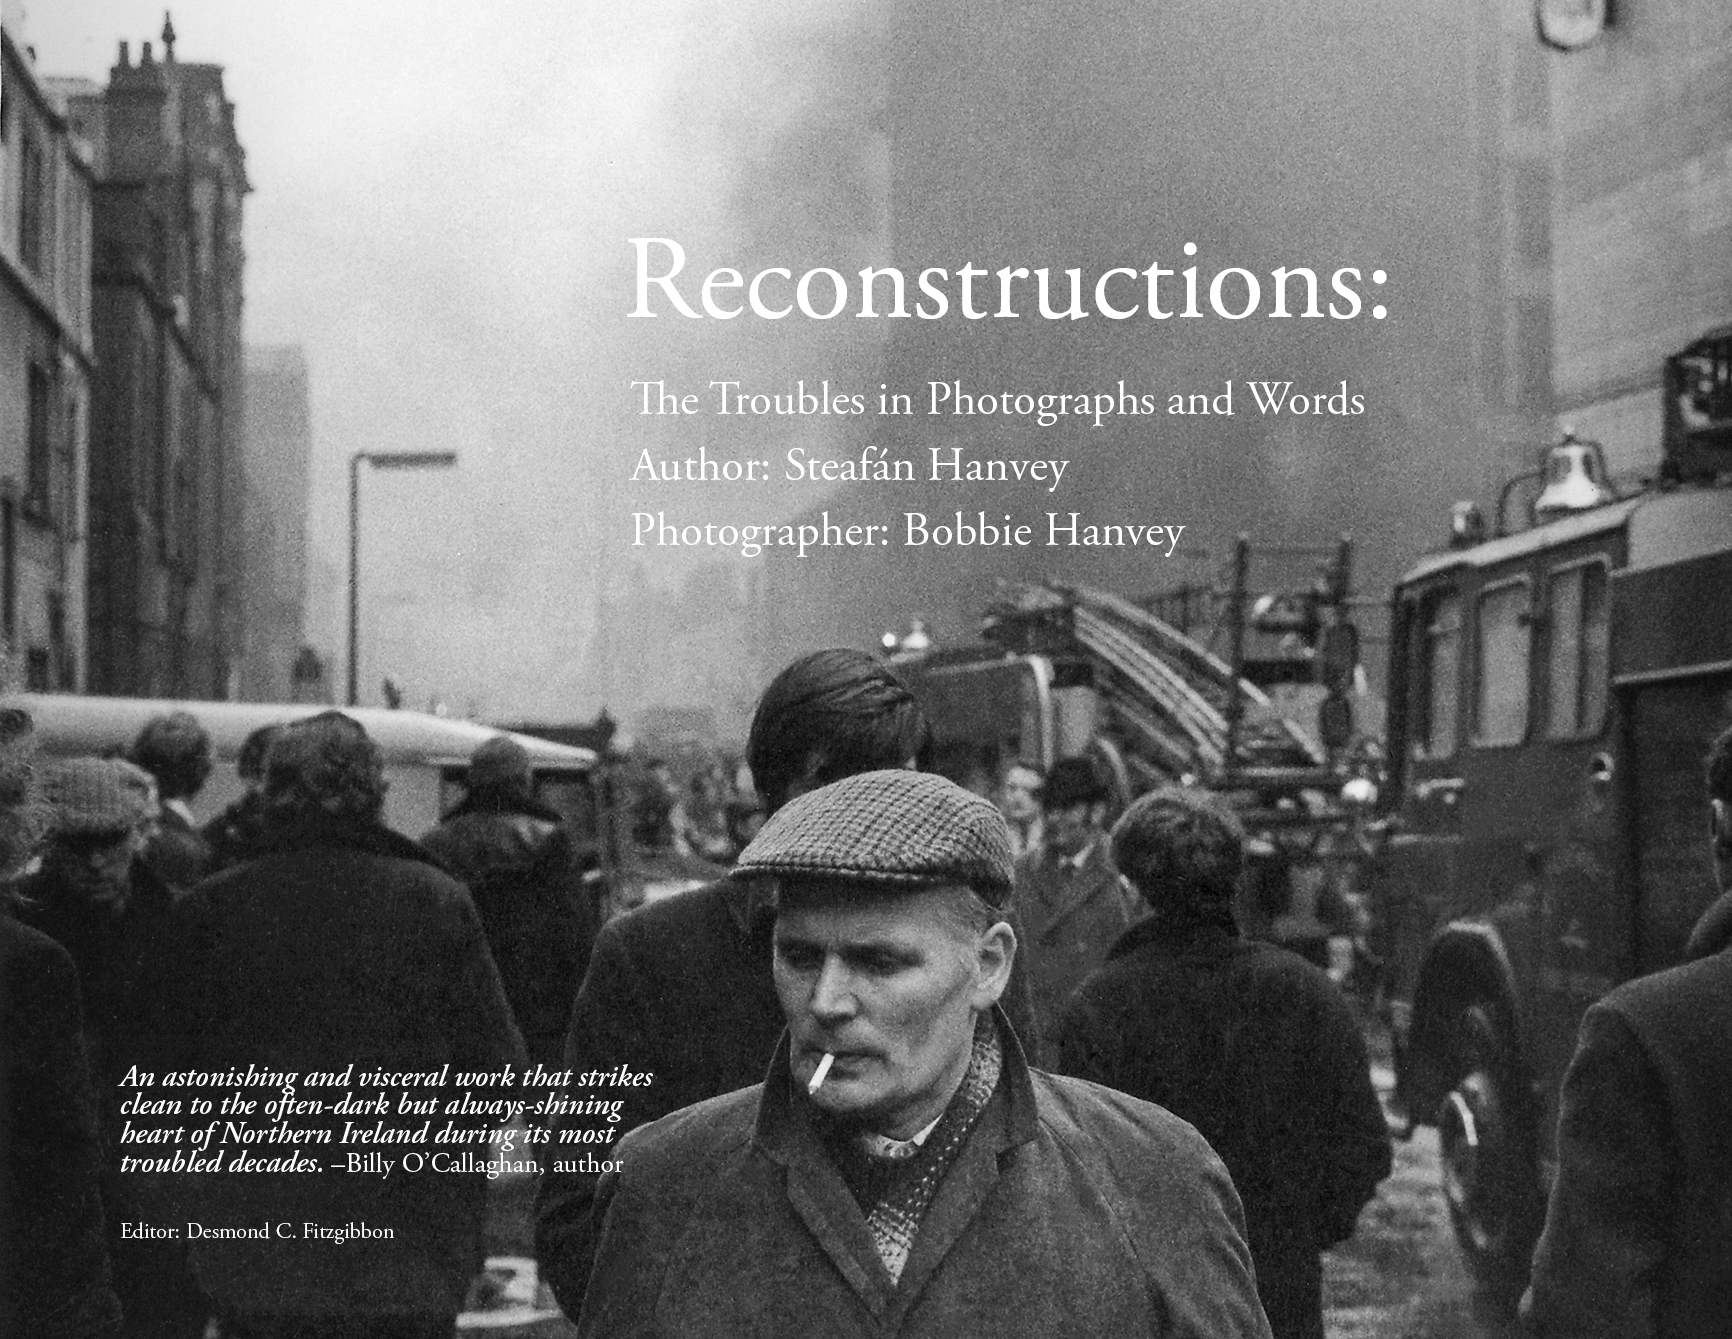 Reconstructions: The Troubles in Photographs and Words (Hardback)